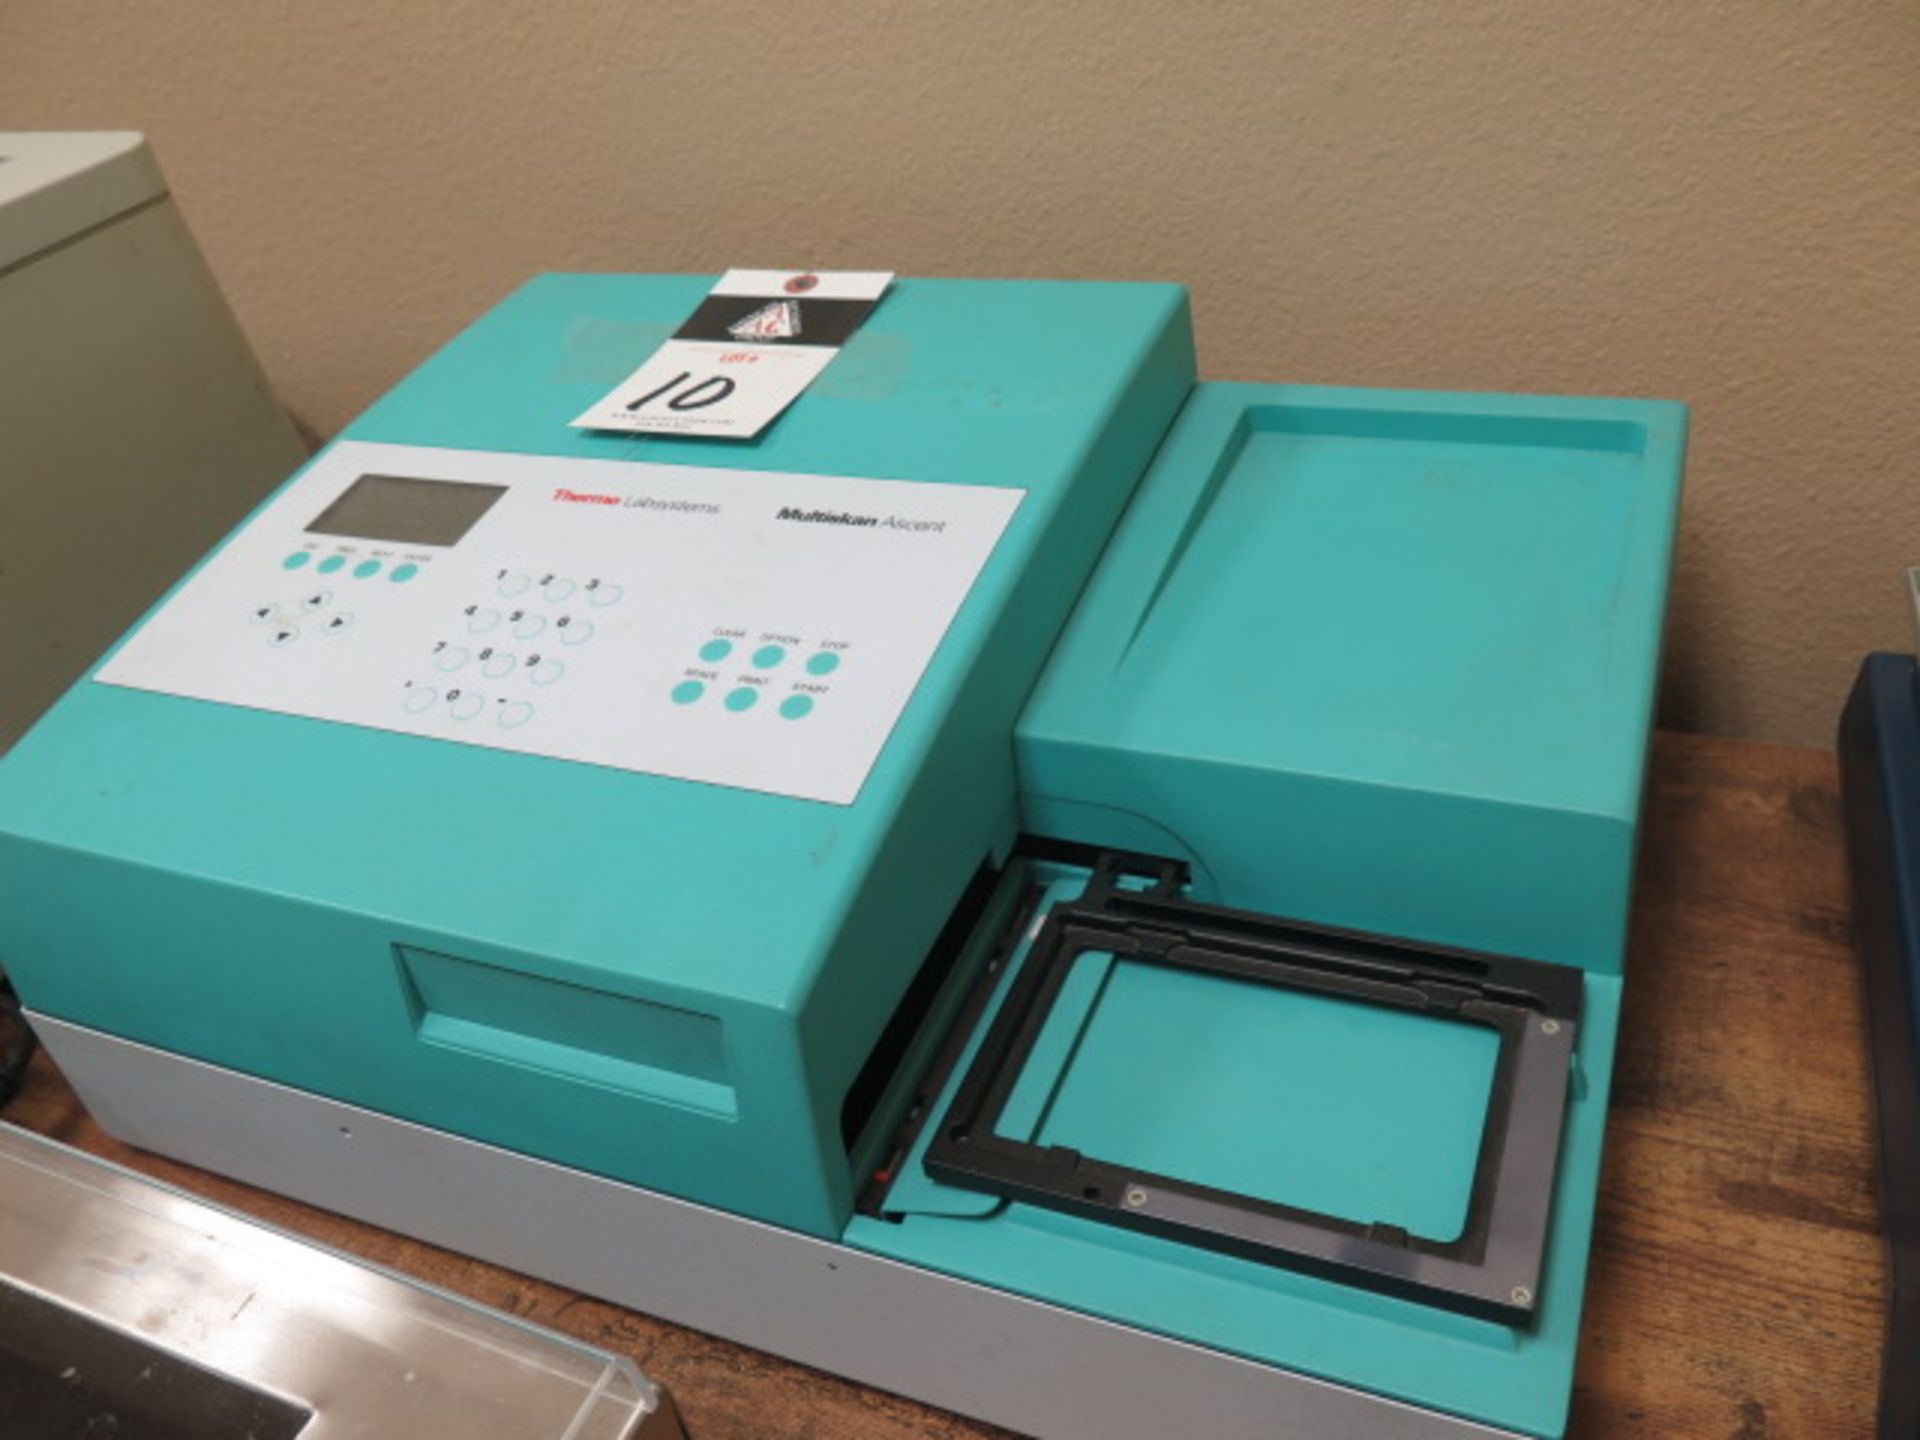 Thermo Lab Systems Mulitskan Ascent mdl. 354 Microplate Reader (SOLD AS-IS - NO WARRANTY) - Image 2 of 6